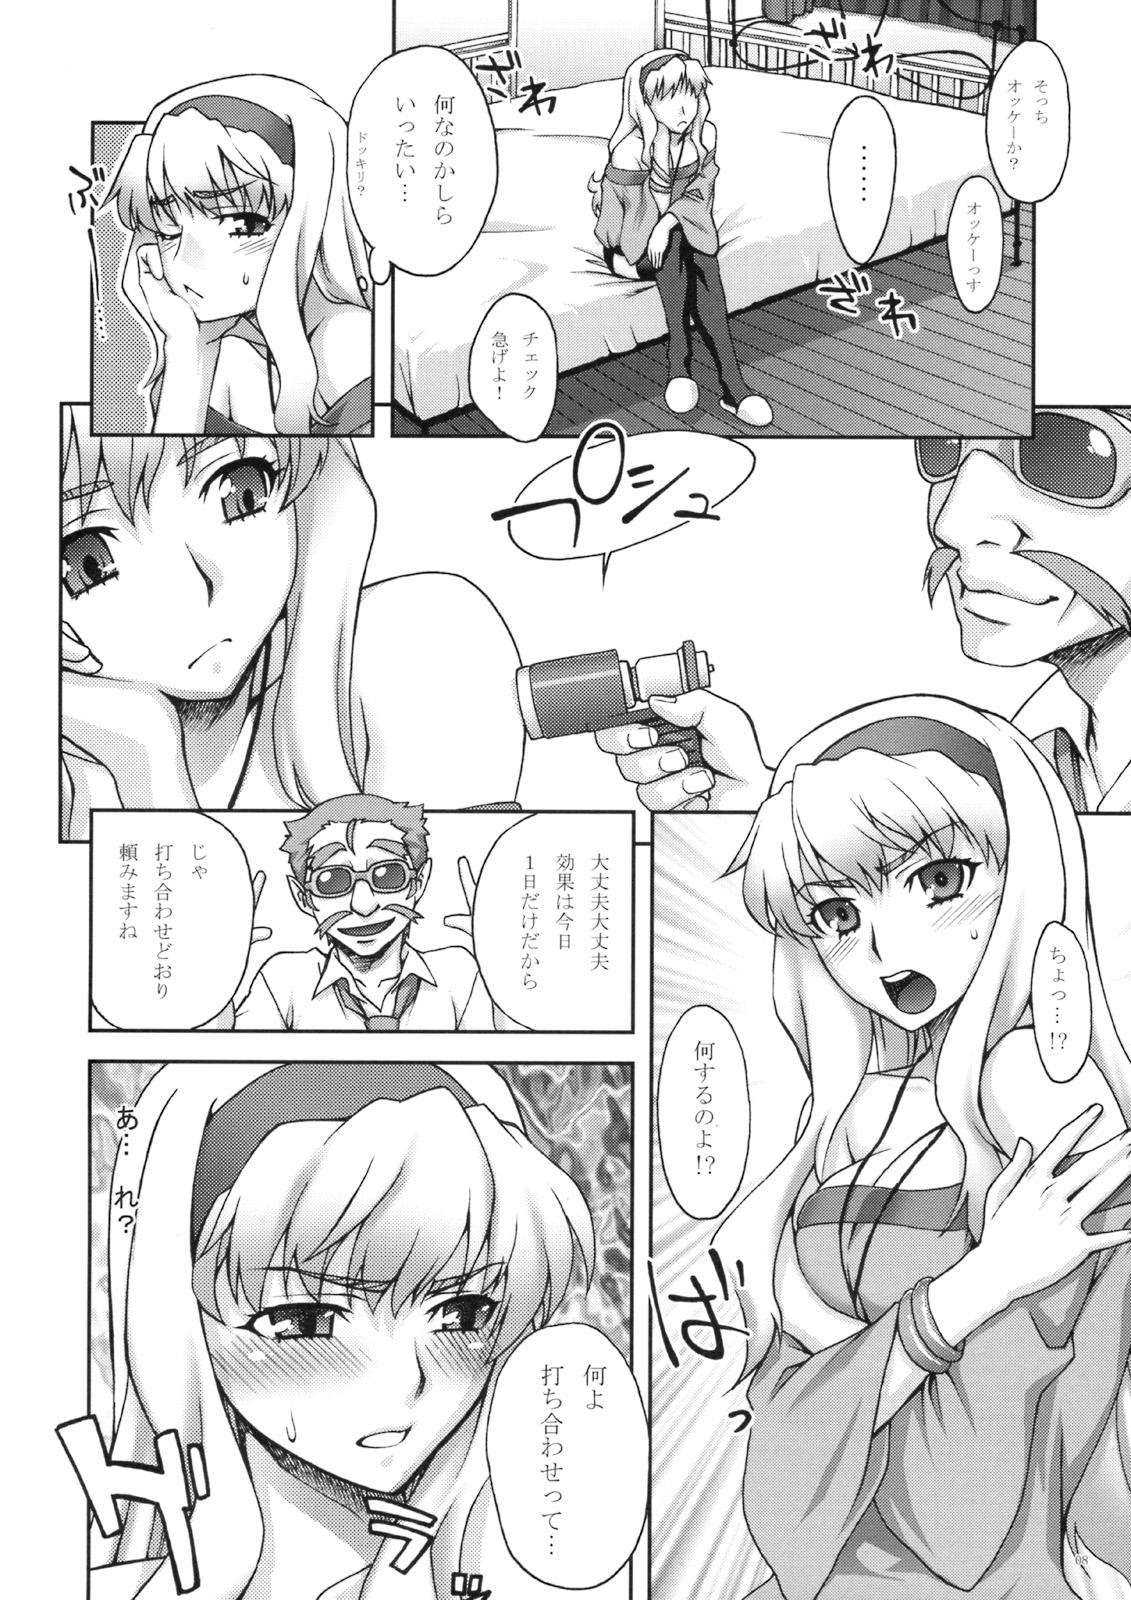 Assfingering photography - Macross frontier Magrinha - Page 7